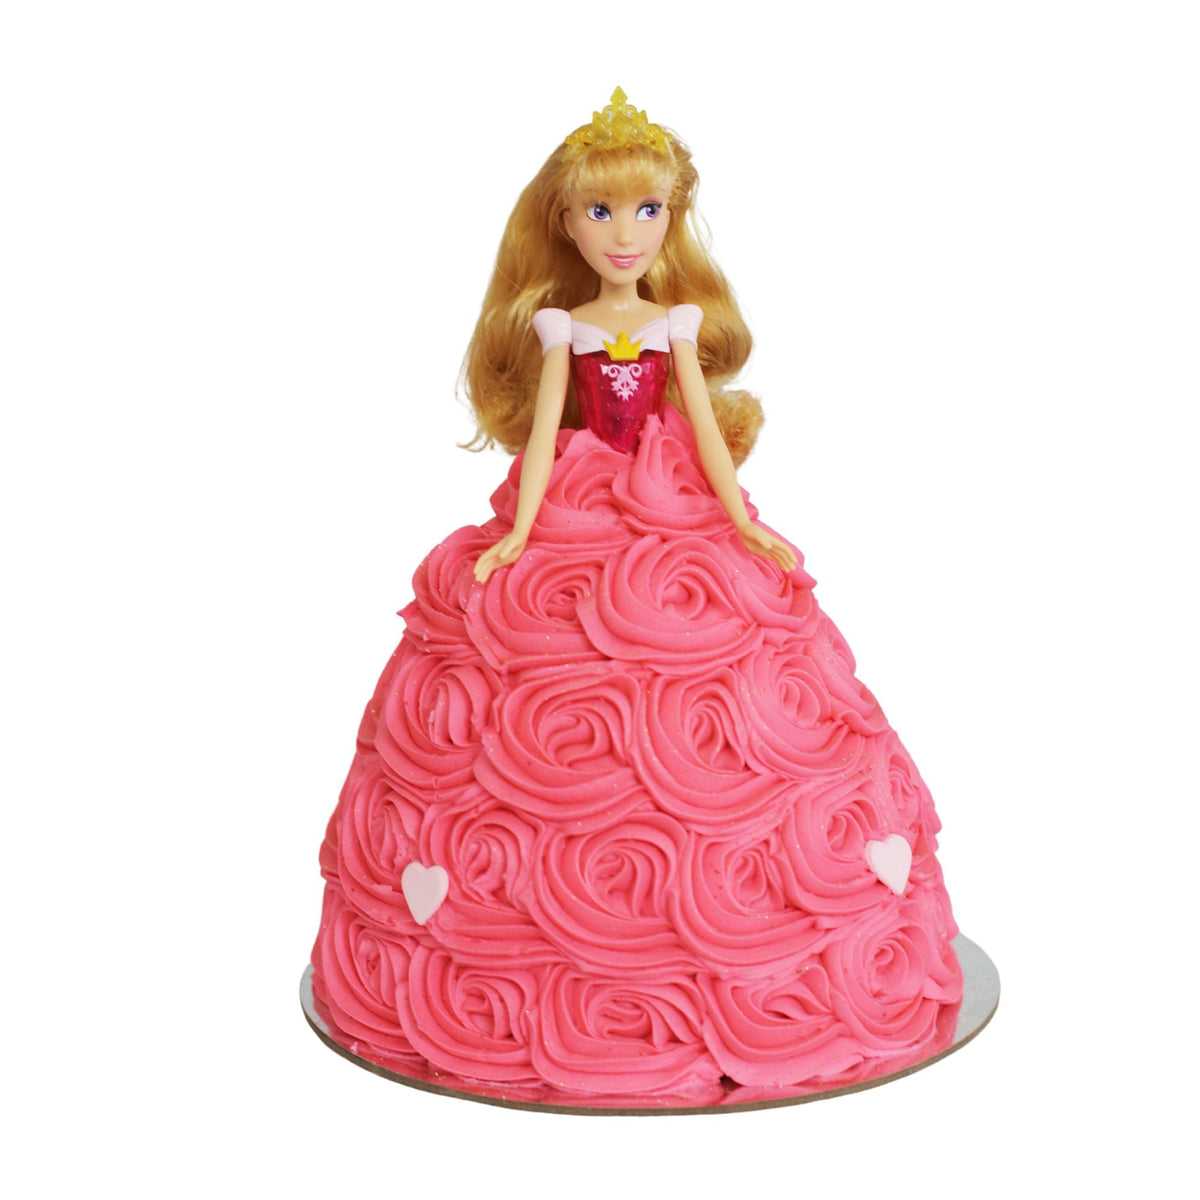 Sleeping Beauty Doll Cake Cakes The Cupcake Queens 